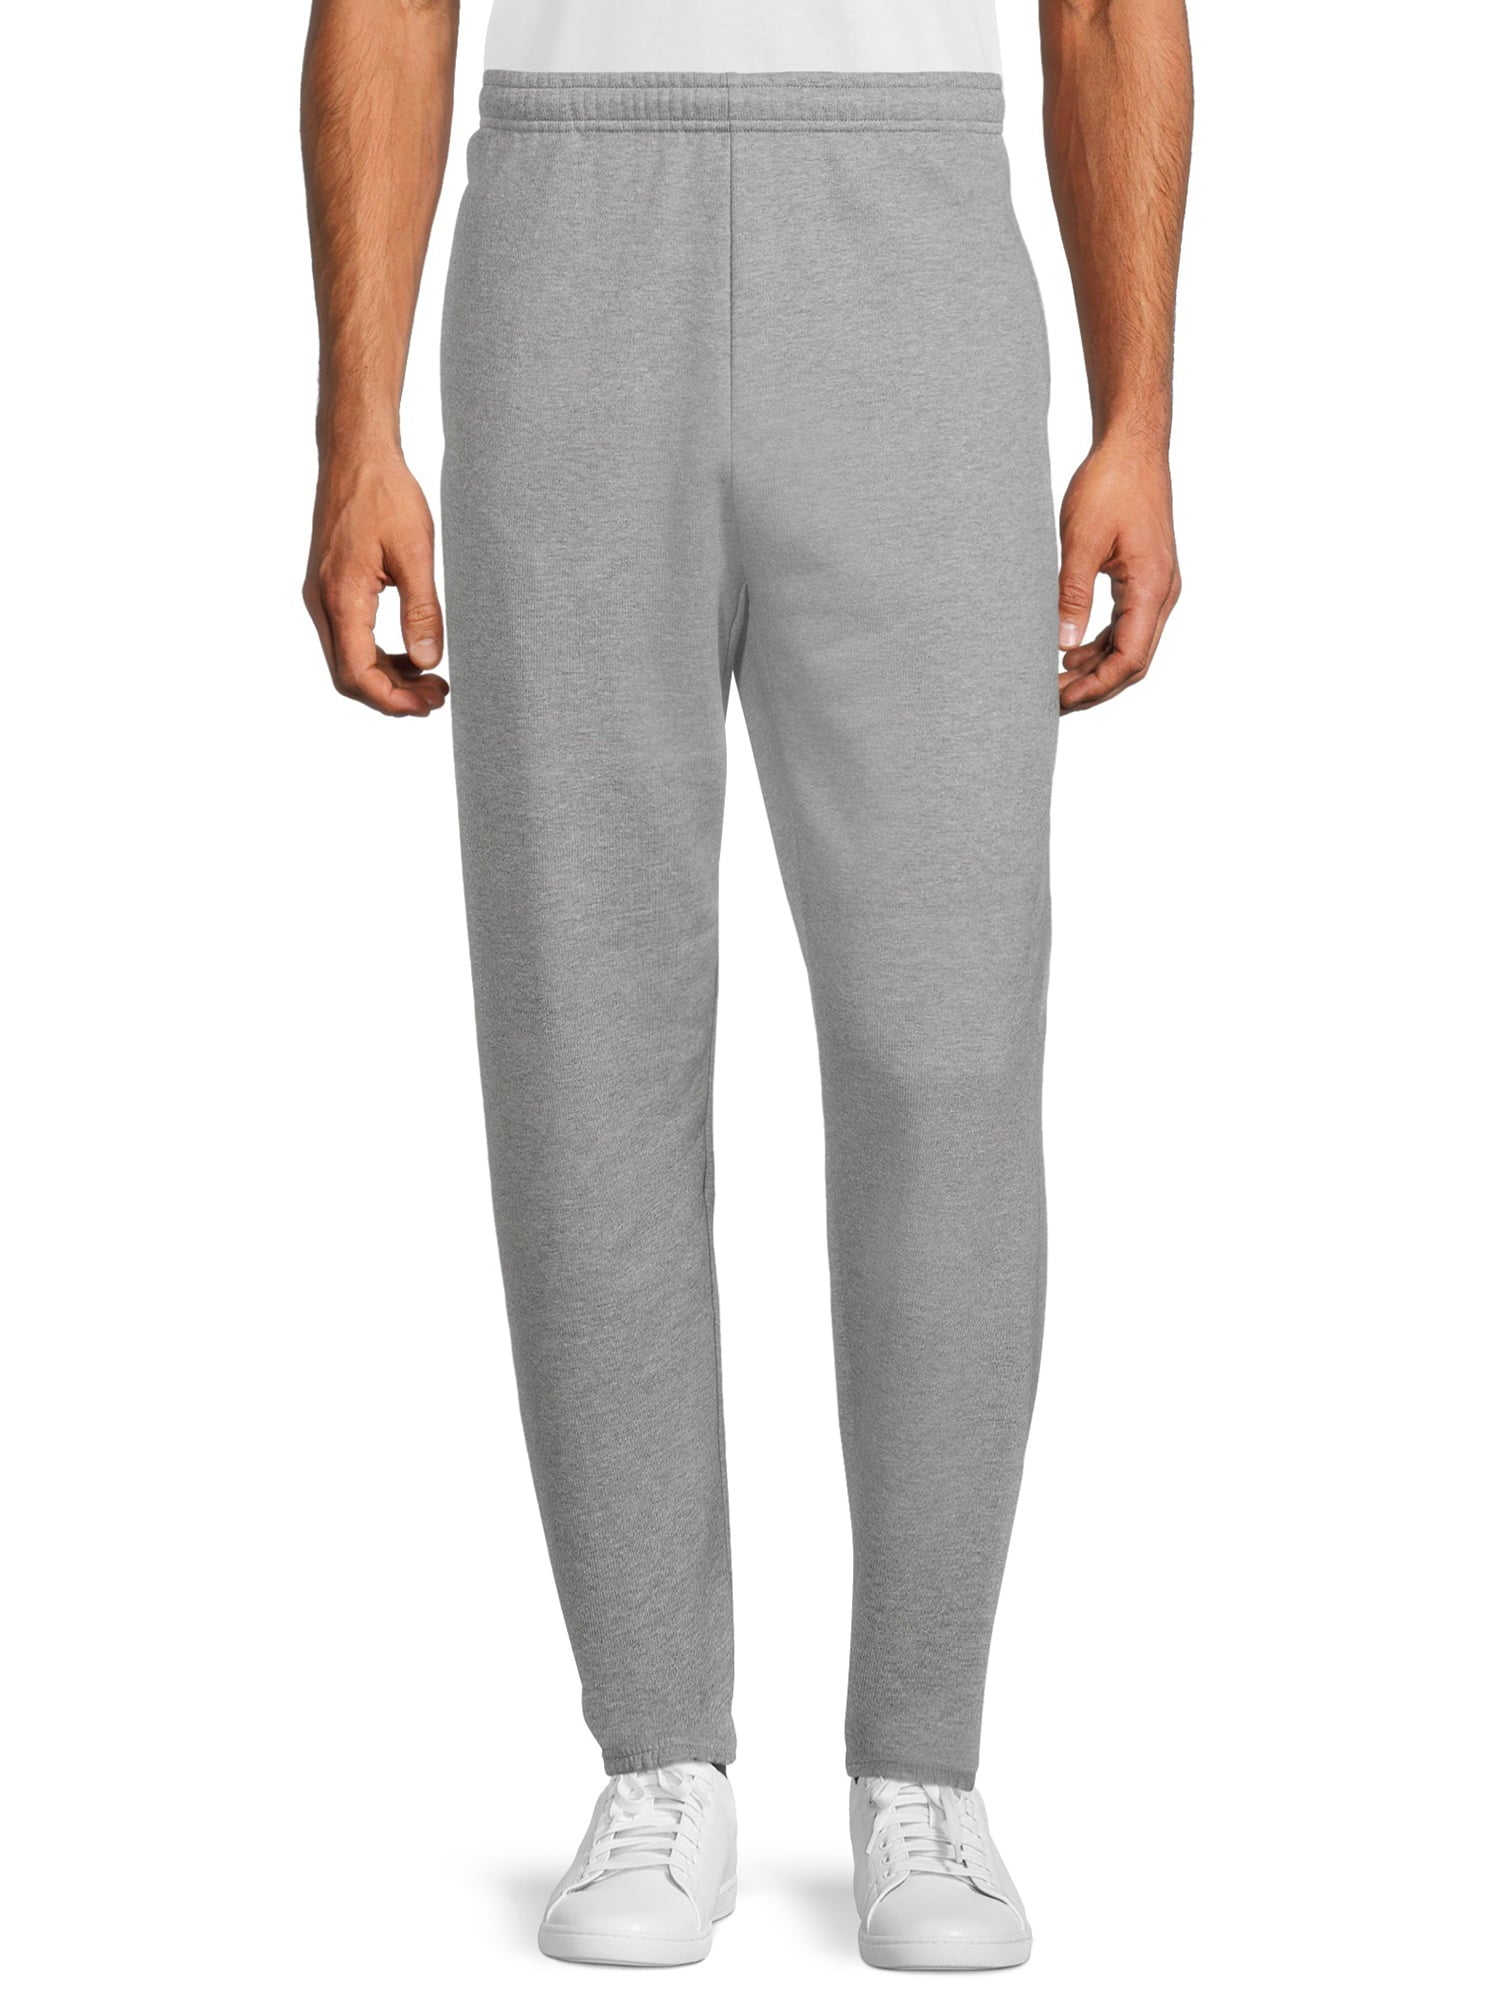 How Much Do Sweatpants Cost At Walmart? – solowomen